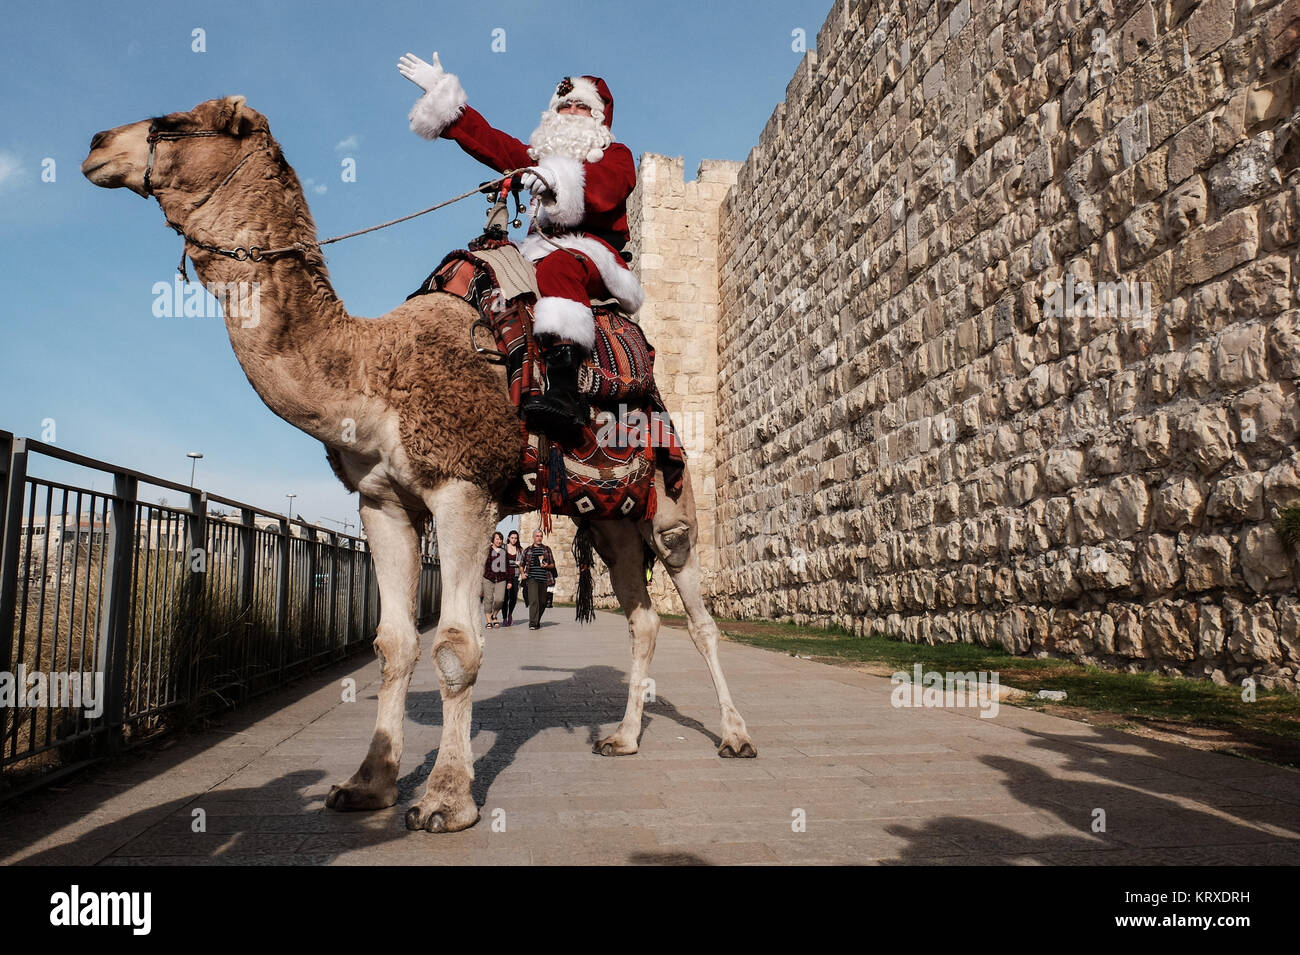 Jerusalem, Israel. 21st December, 2017. Santa Claus, or 'Baba Noel' as he is called in Arabic, rides a camel substitute for rain deer near Jerusalem's Old City Jaffa Gate. The Jerusalem Municipality and the Jewish National Fund distributed specially grown Arizona Cypress Christmas trees to the Christian population at the Jaffa Gate. Credit: Nir Alon/Alamy Live News Stock Photo